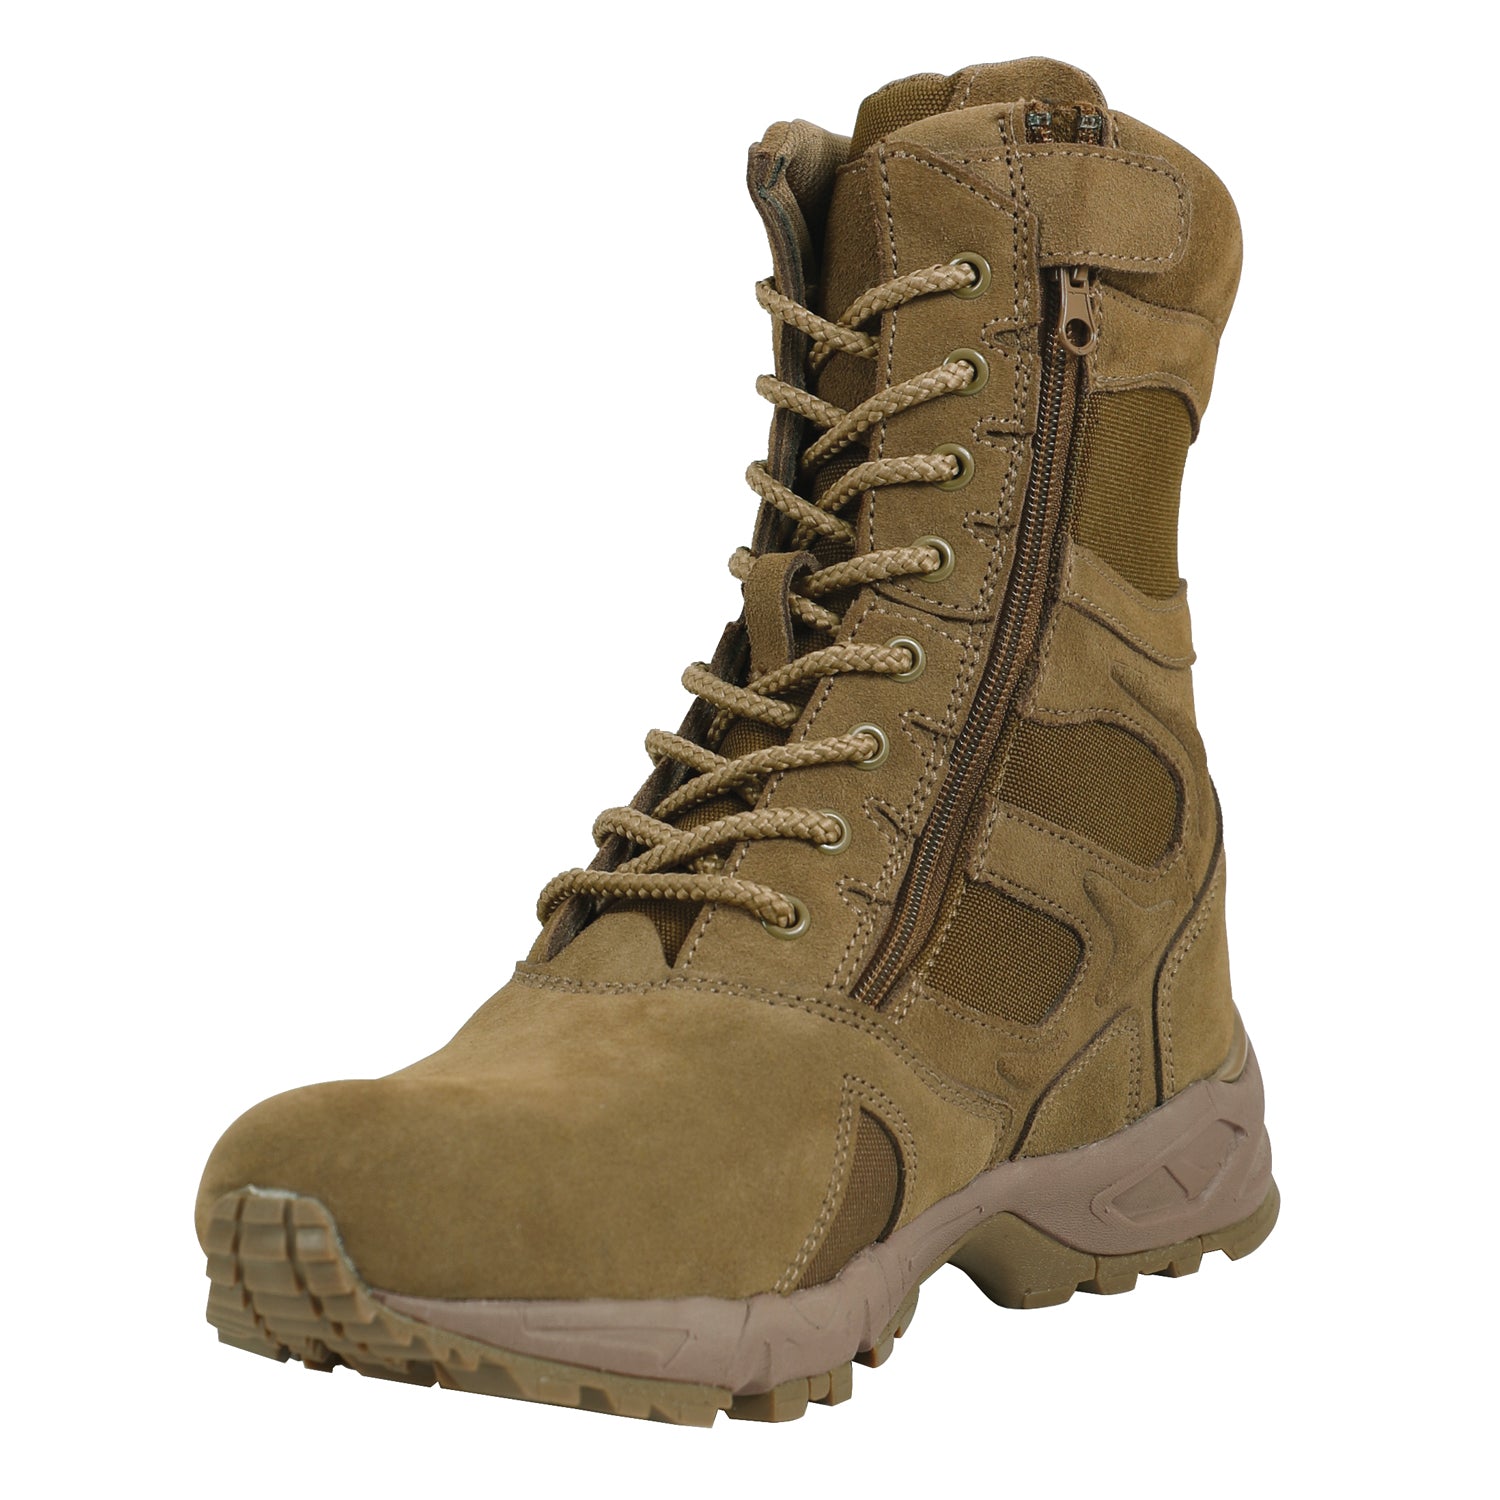 Rothco Forced Entry 8" Deployment Boots With Side Zipper